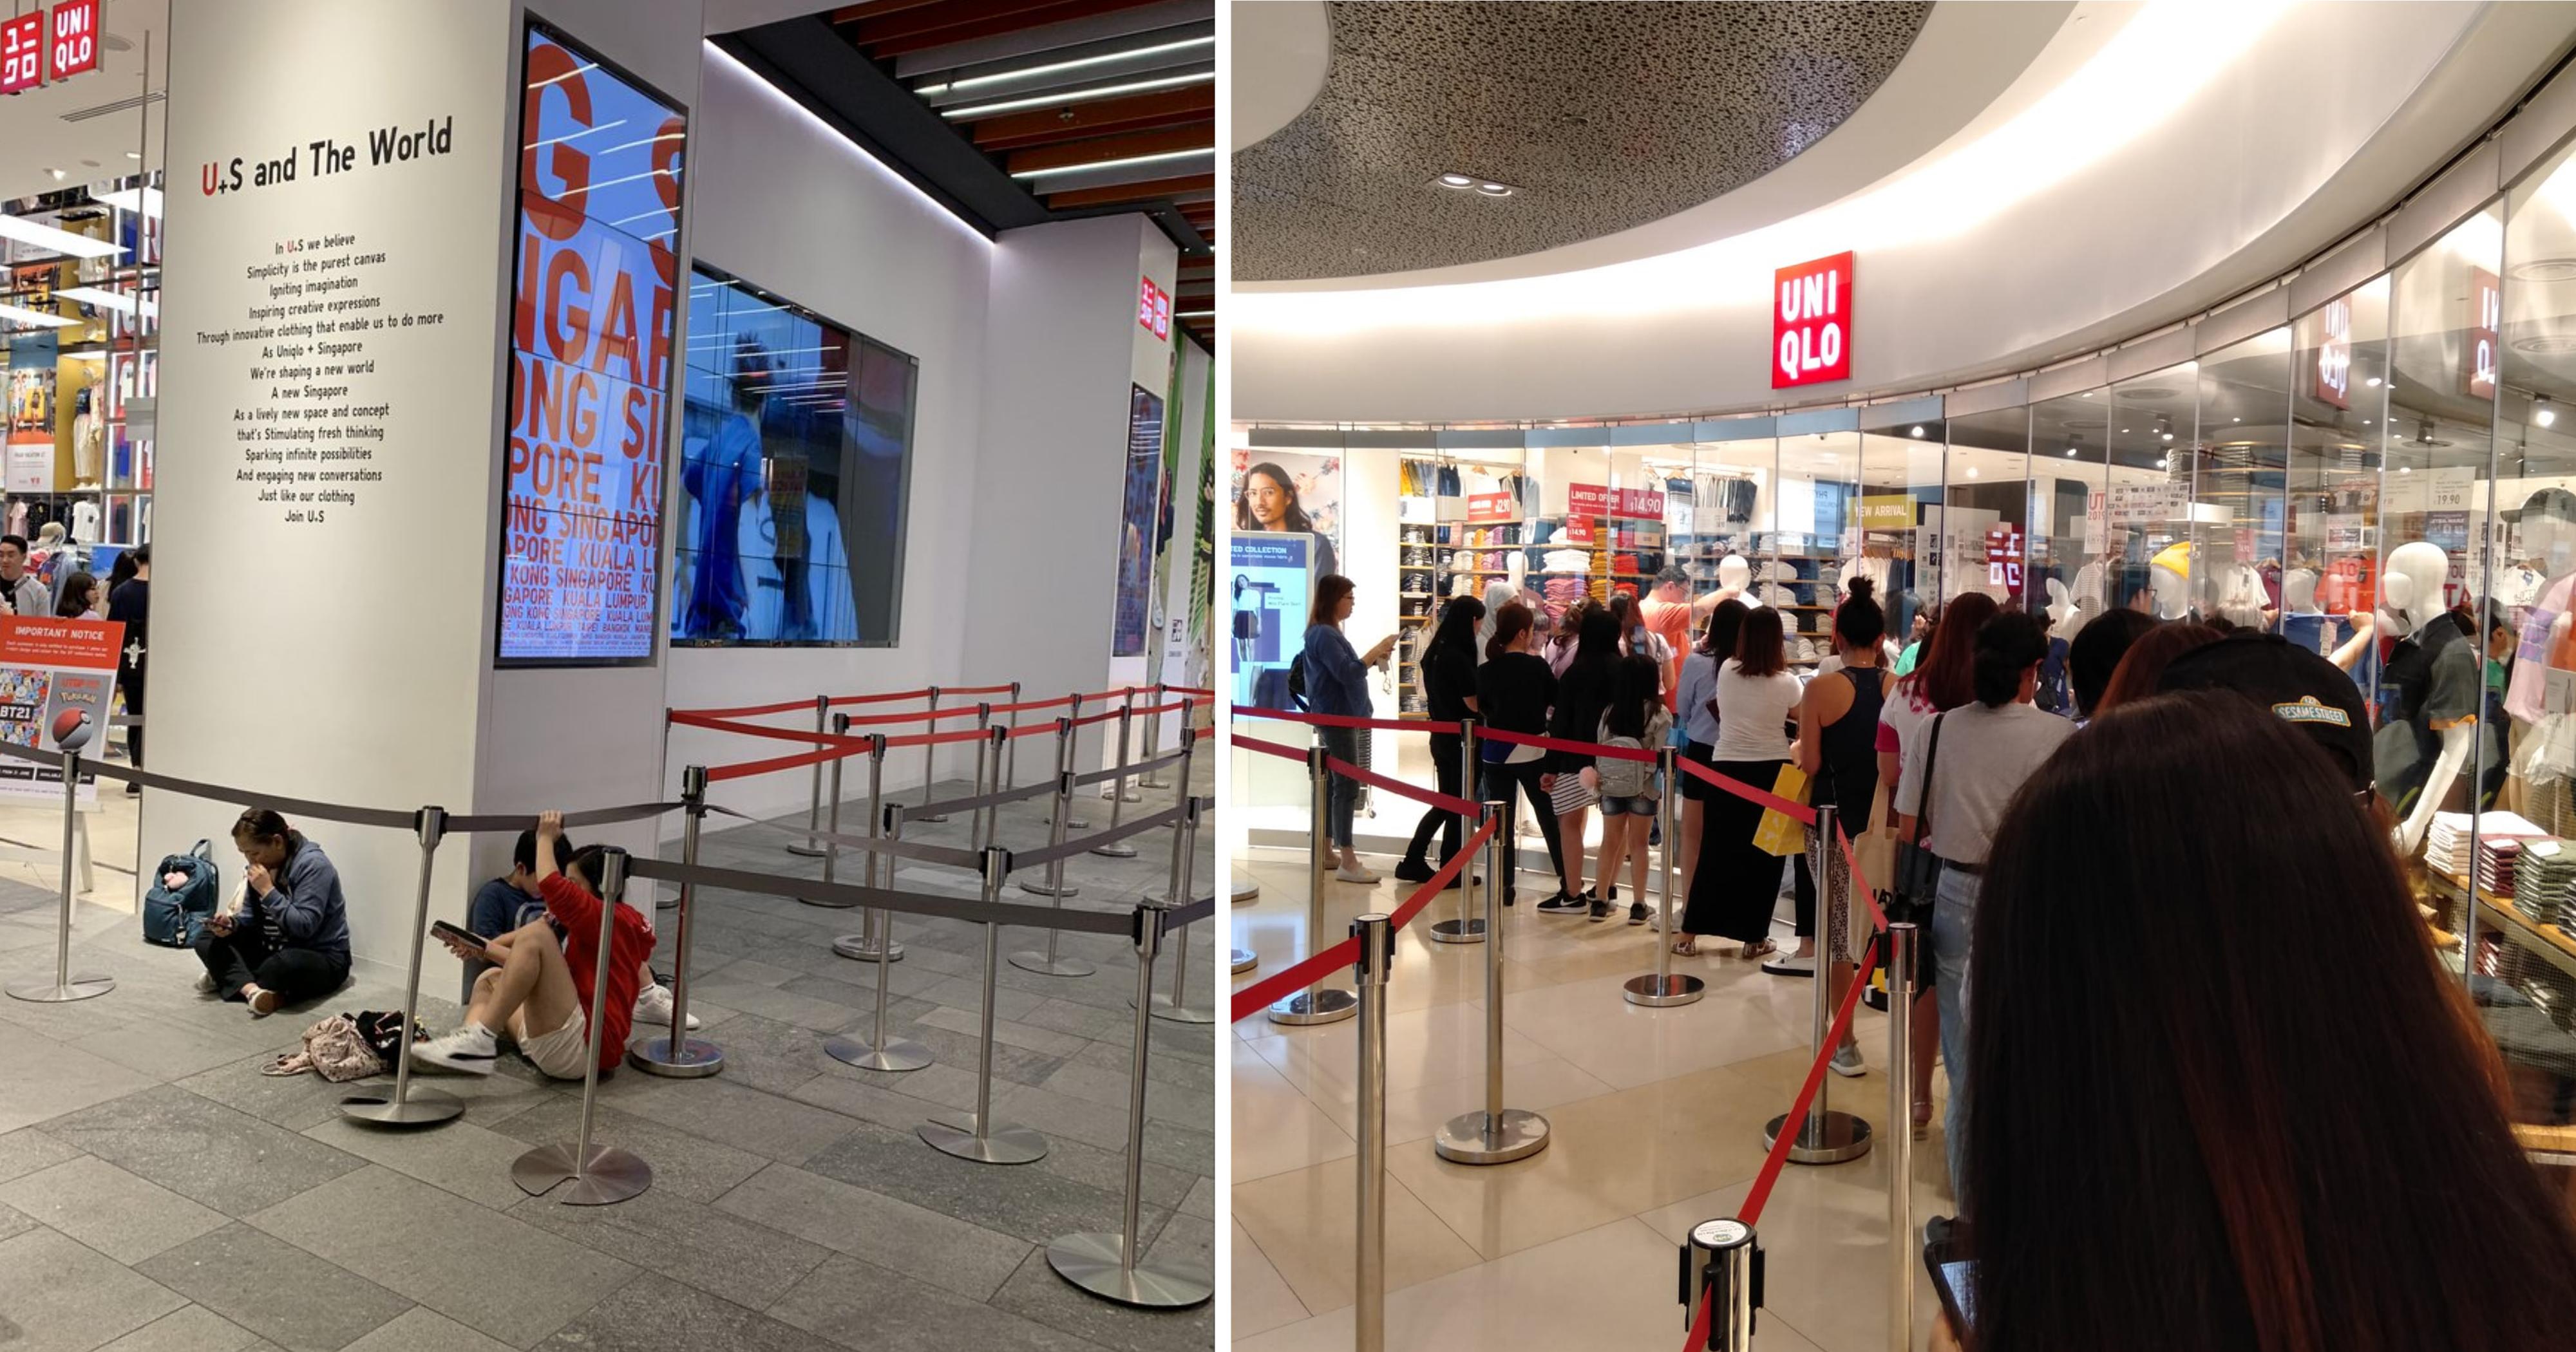 UNIQLO offers Great Singapore Sale deals Enjoy savings on over 150 items  from as low as 490 Offers end 29 May 2018  MoneyDigestsg